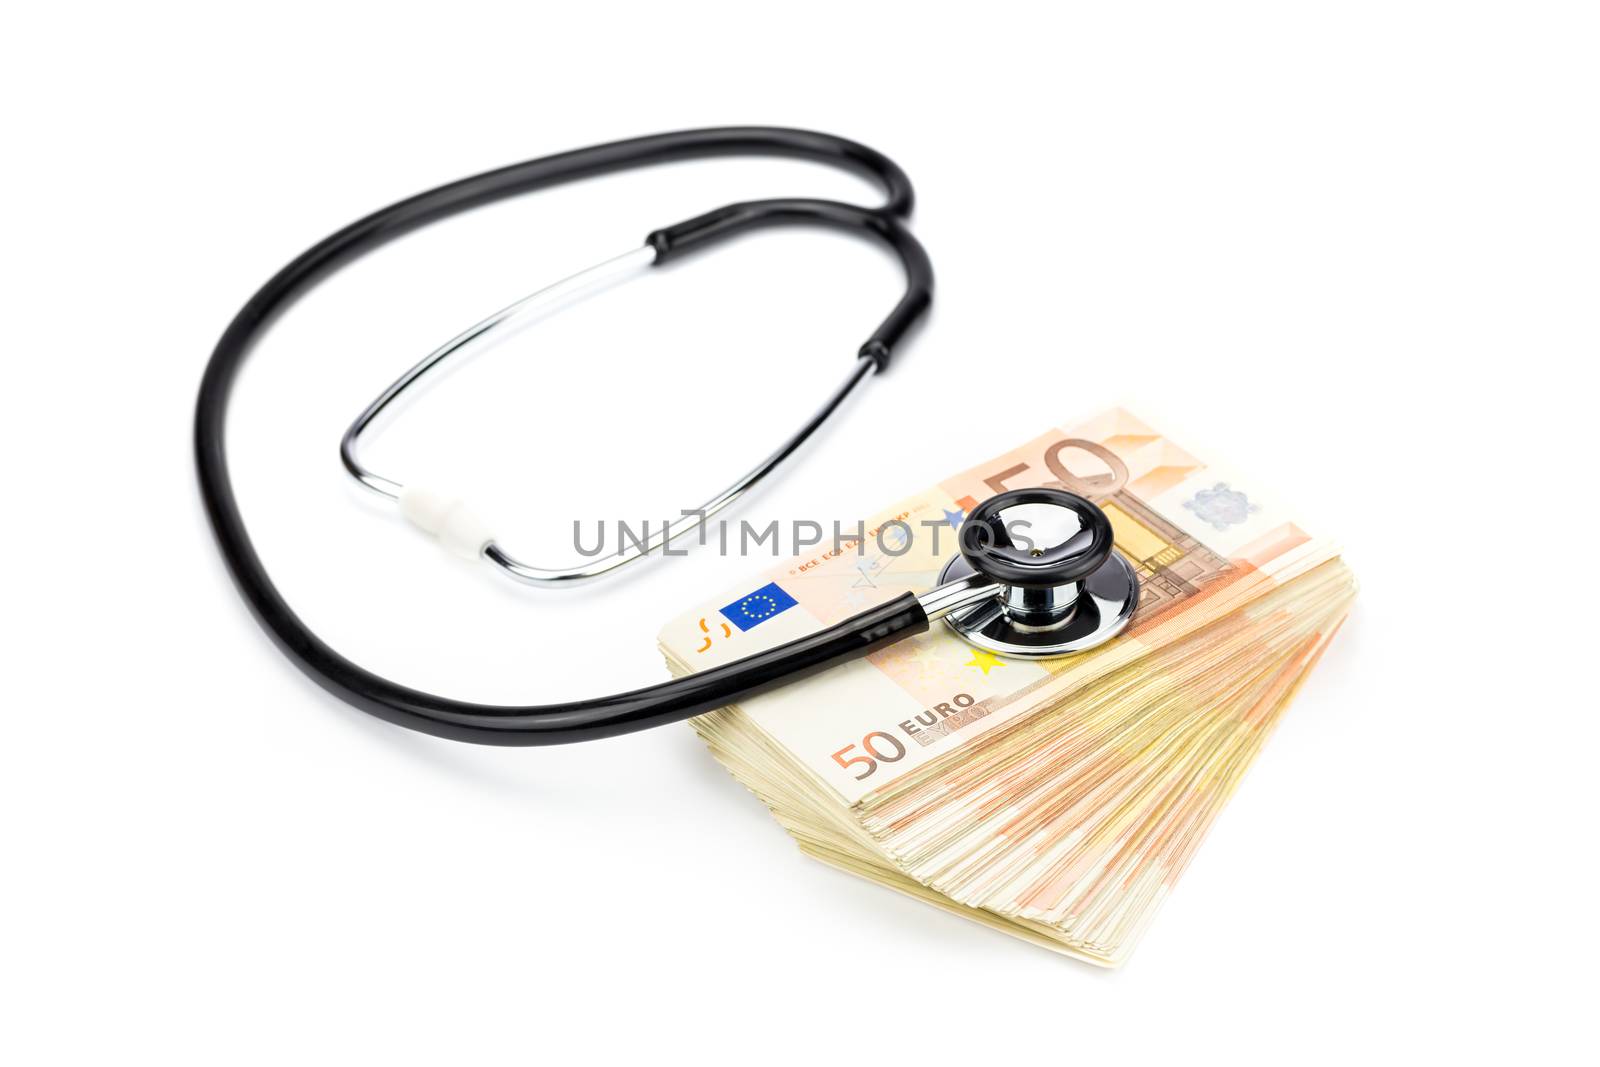 Professional stethoscope lying on stack of euro notes by BenSchonewille